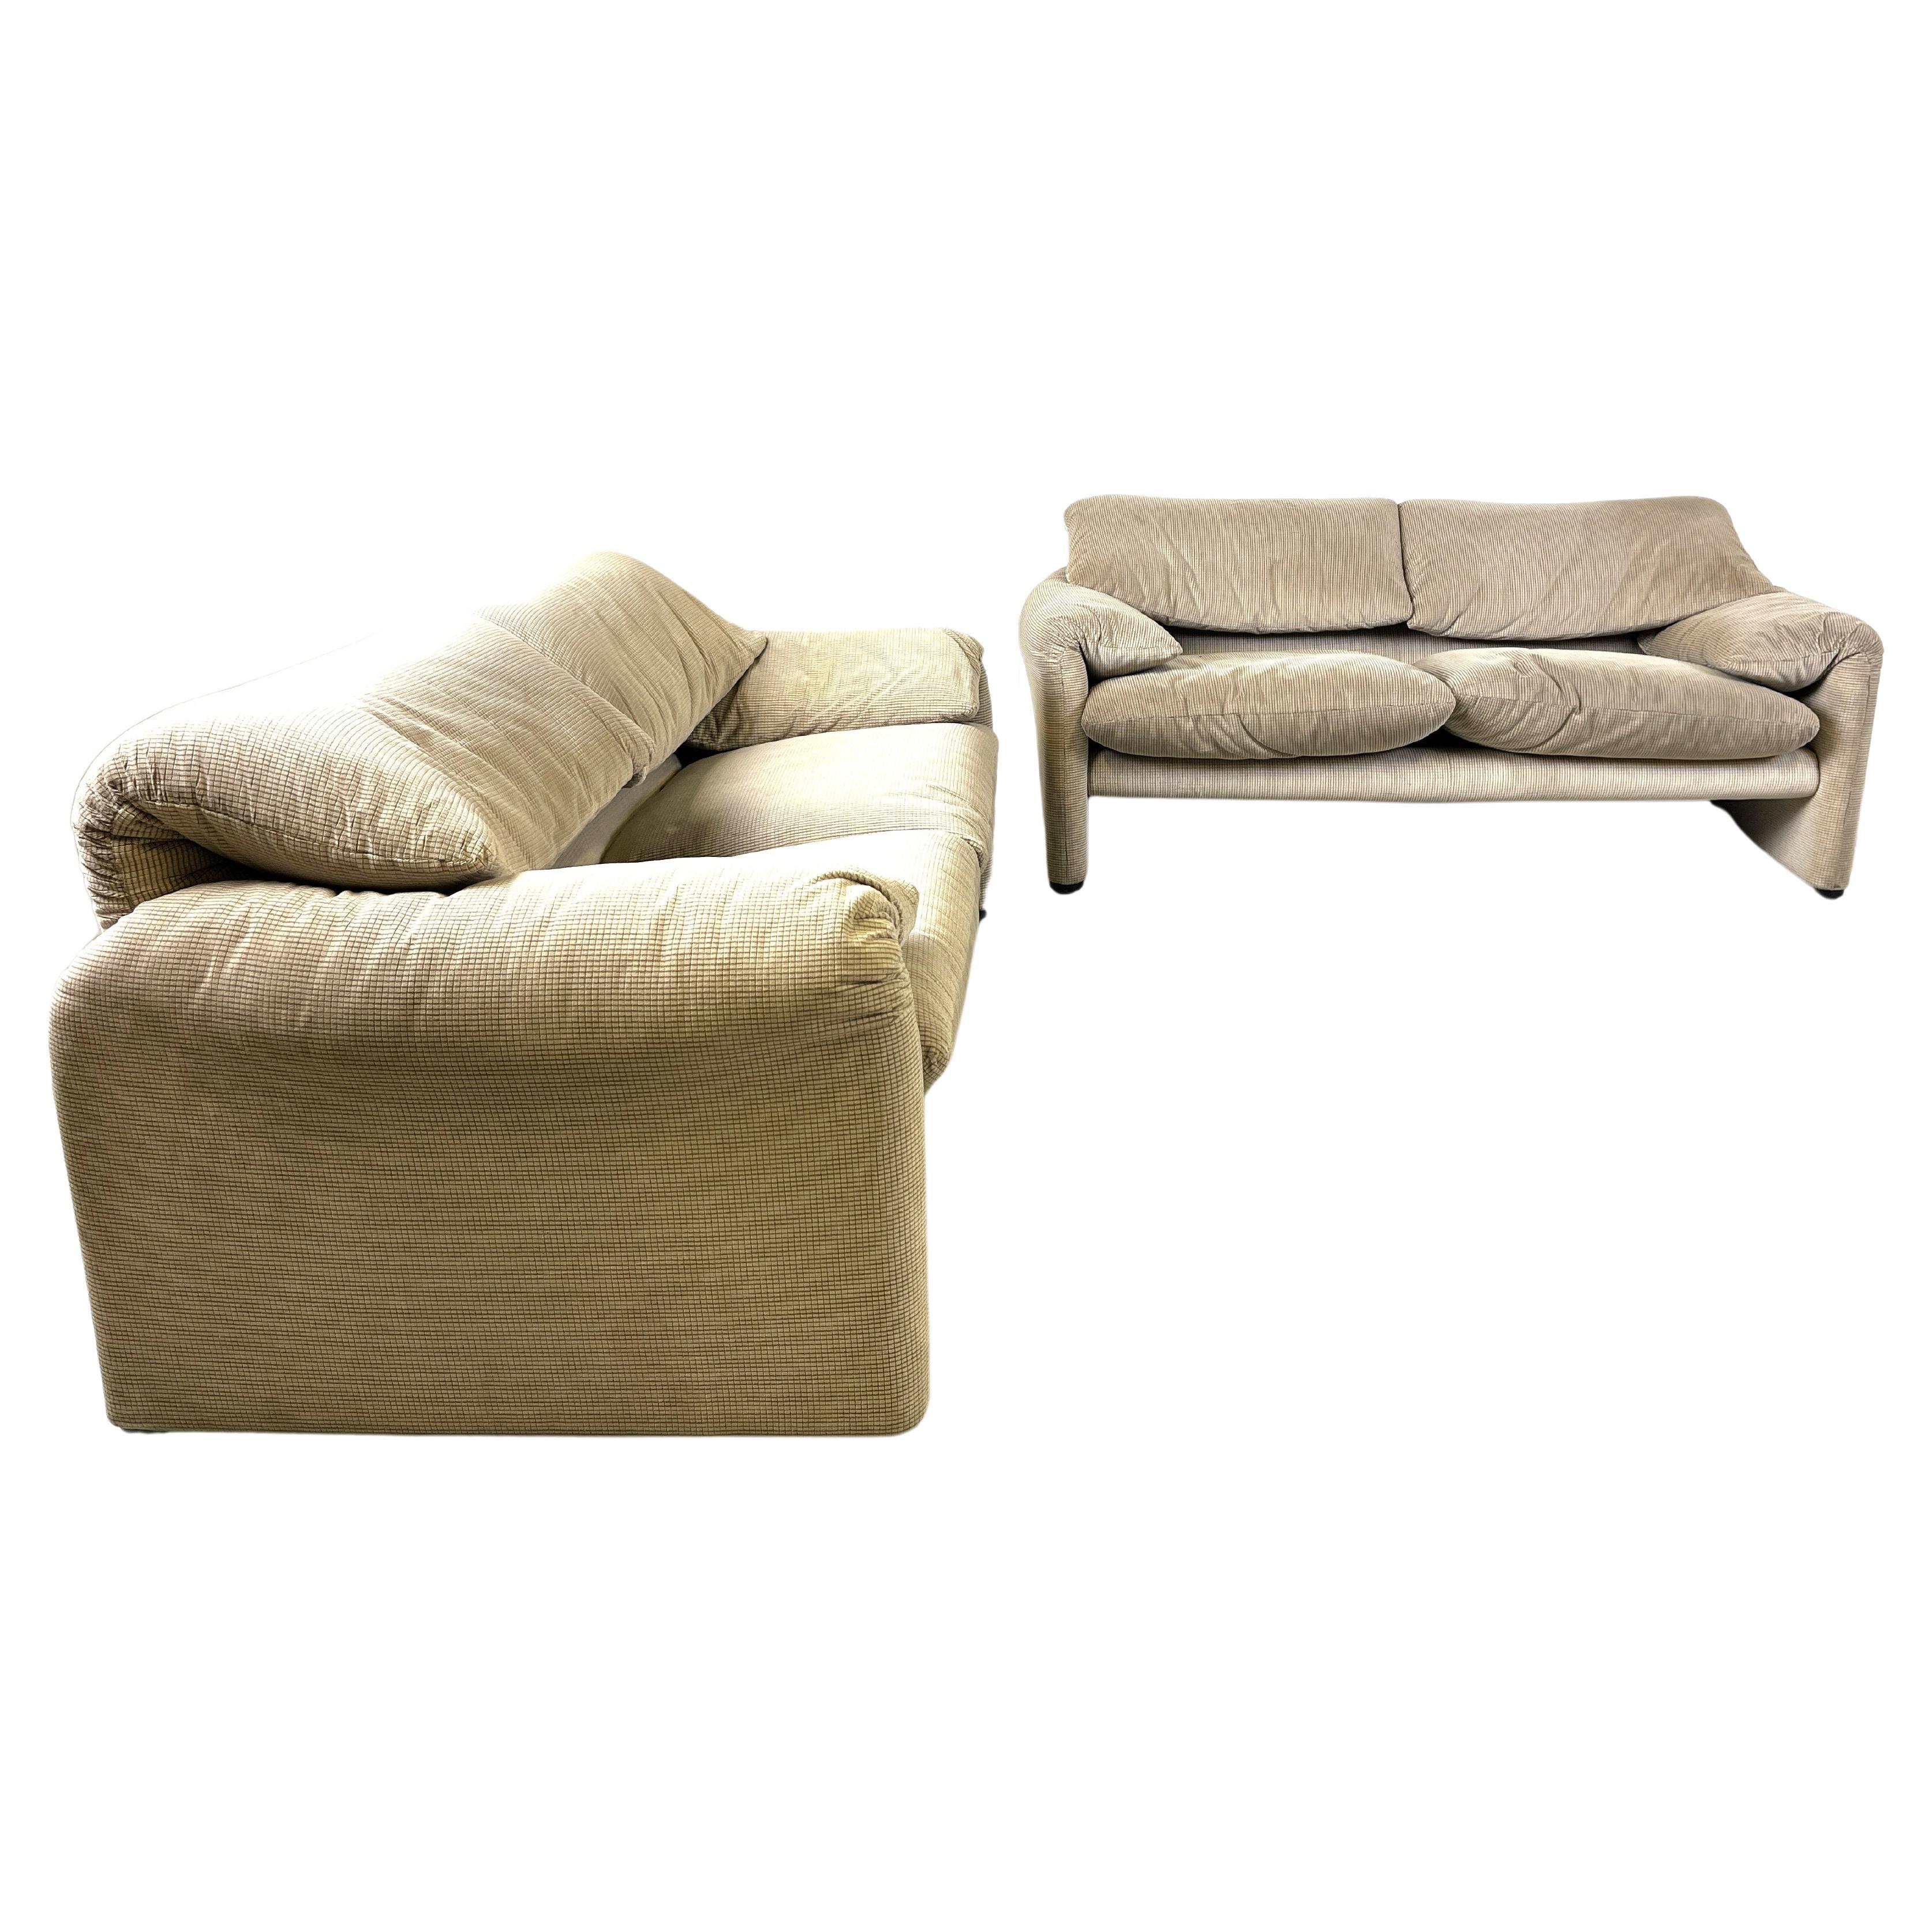 Pair of Maralunga sofas by Vico Magistretti for Cassina, 1970s For Sale